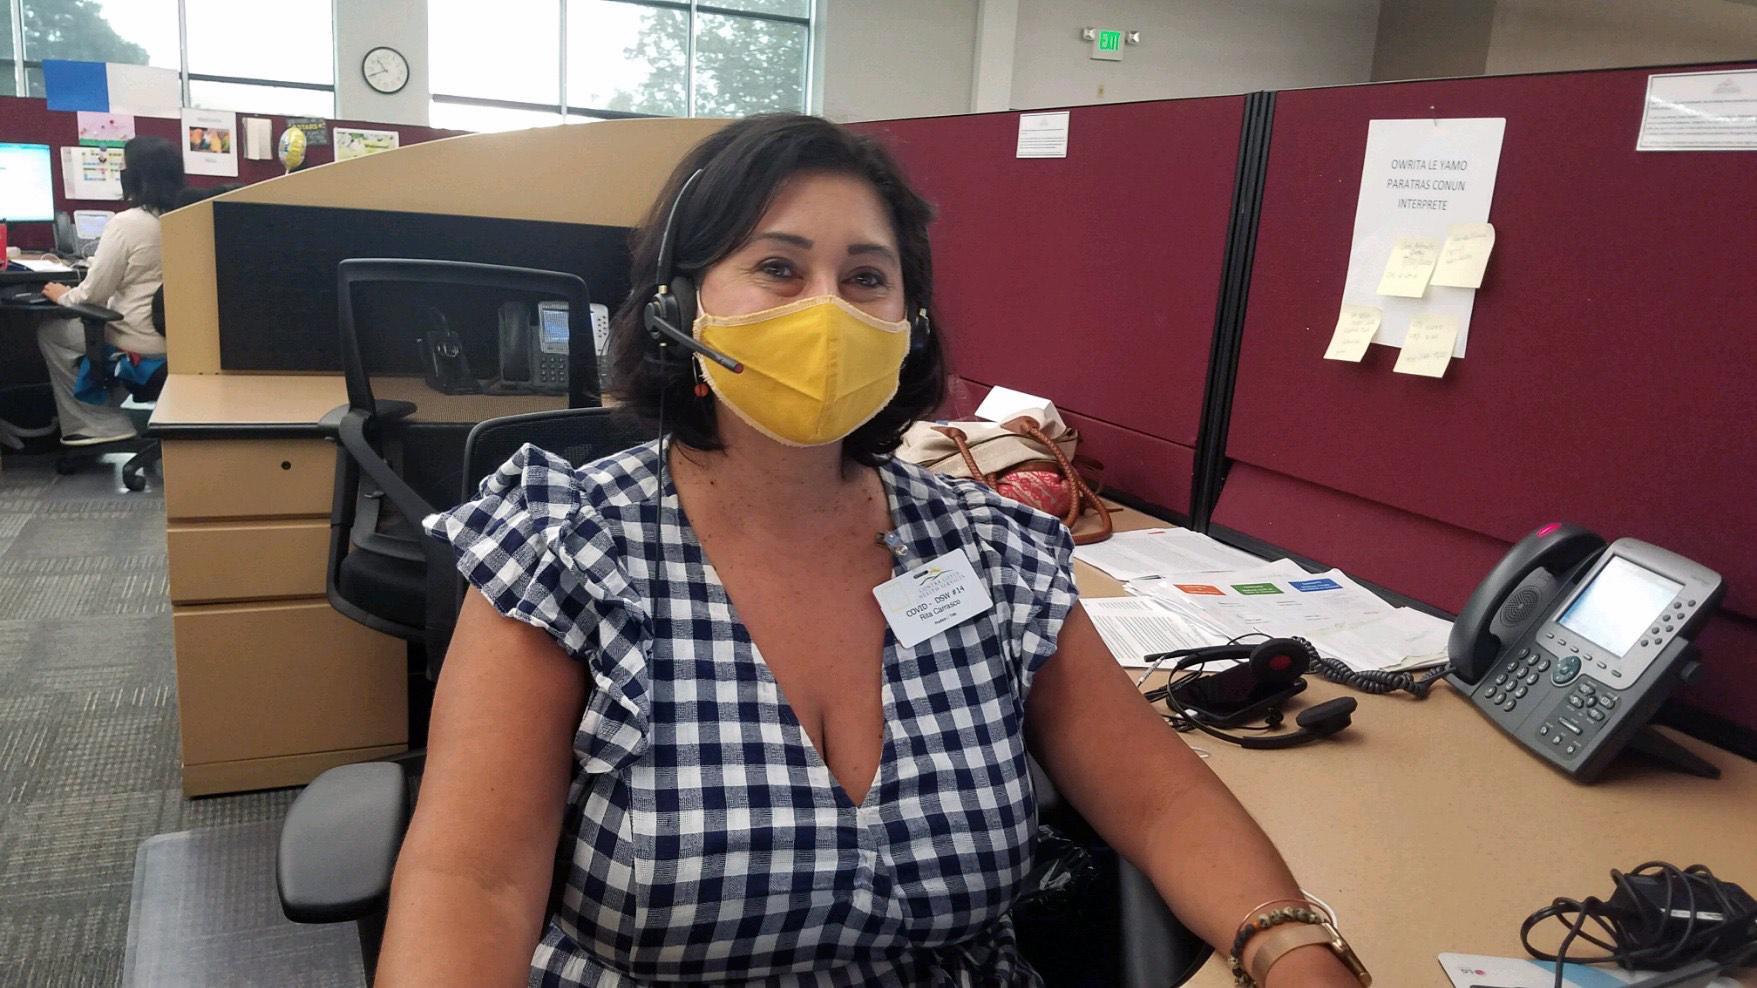 AFSCME Local 1 member and librarian Rita Carrasco has been working as a disaster service worker in the call center during the COVID-19 pandemic.